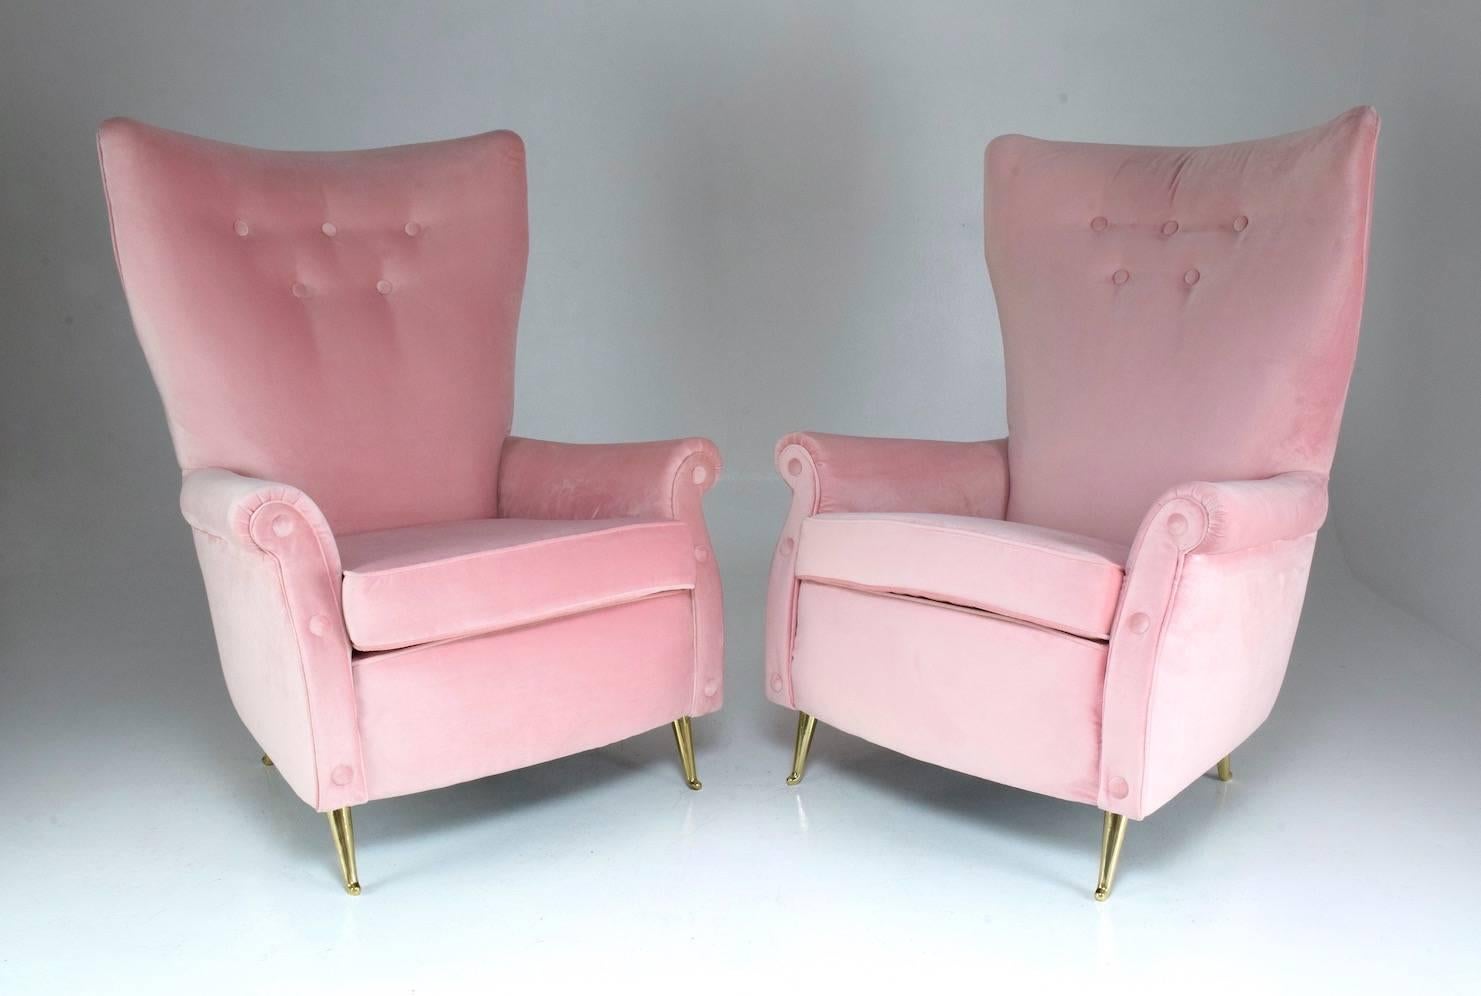 Pair of 20th century vintage Italian club armchairs designed with a high comfortable backrests and buttons manufactured by ISA Bergamo.
In fully restored condition with new foam padding, soft light pink velvet upholstery and iconic polished brass